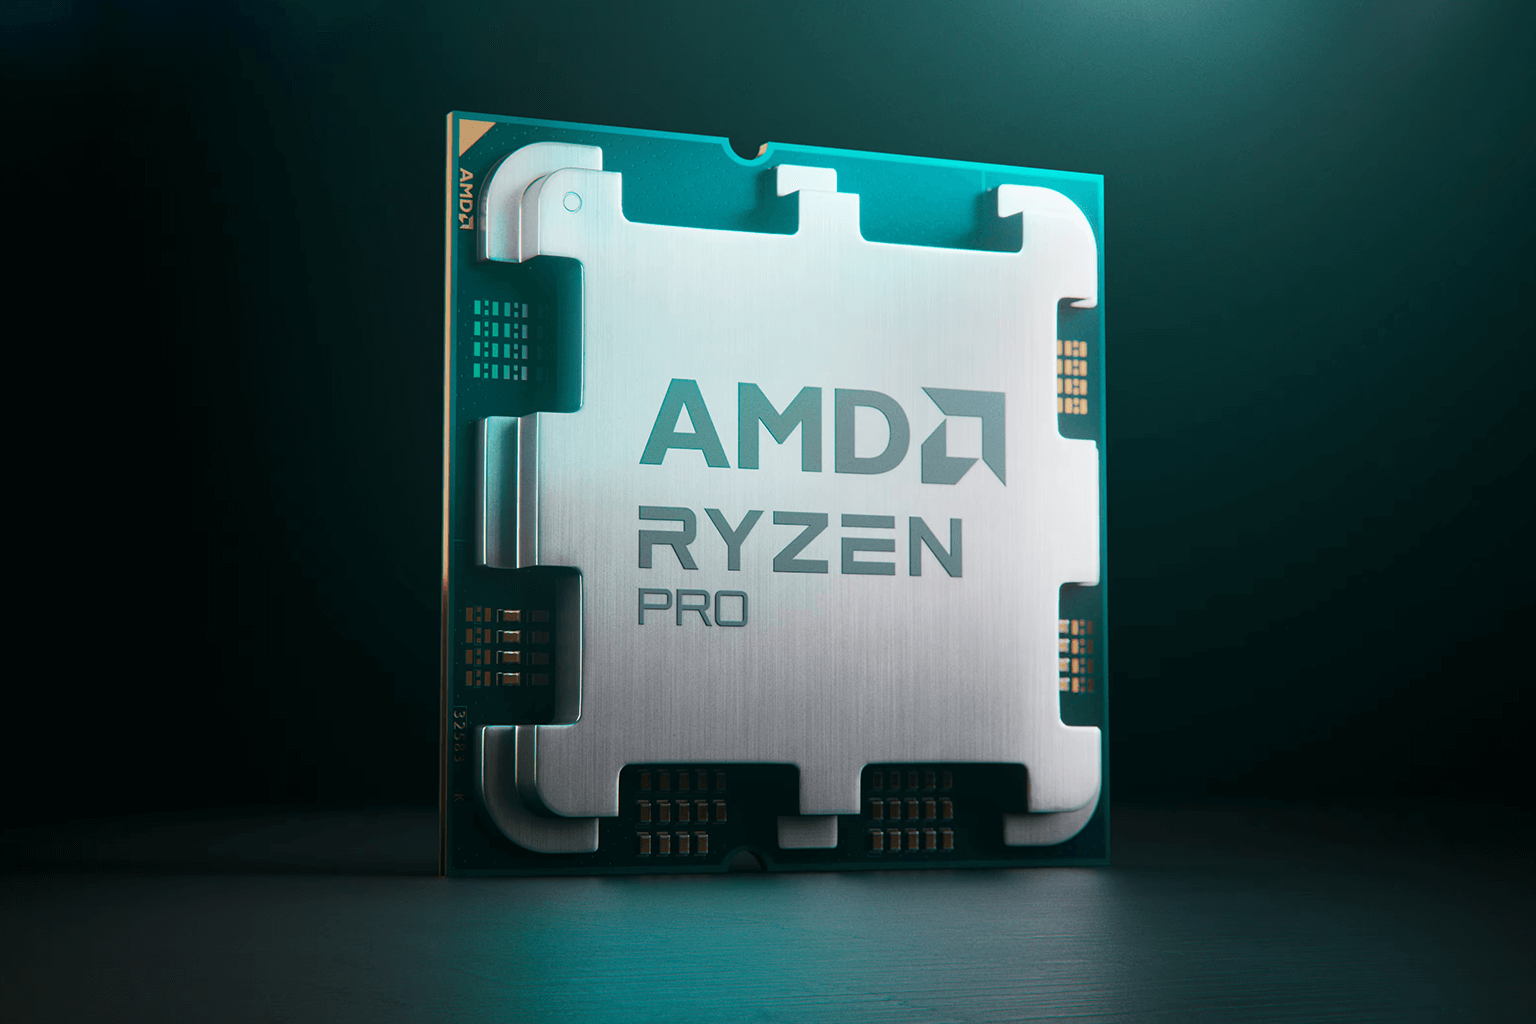 AMD Launches New AI Chips to Compete with Nvidia